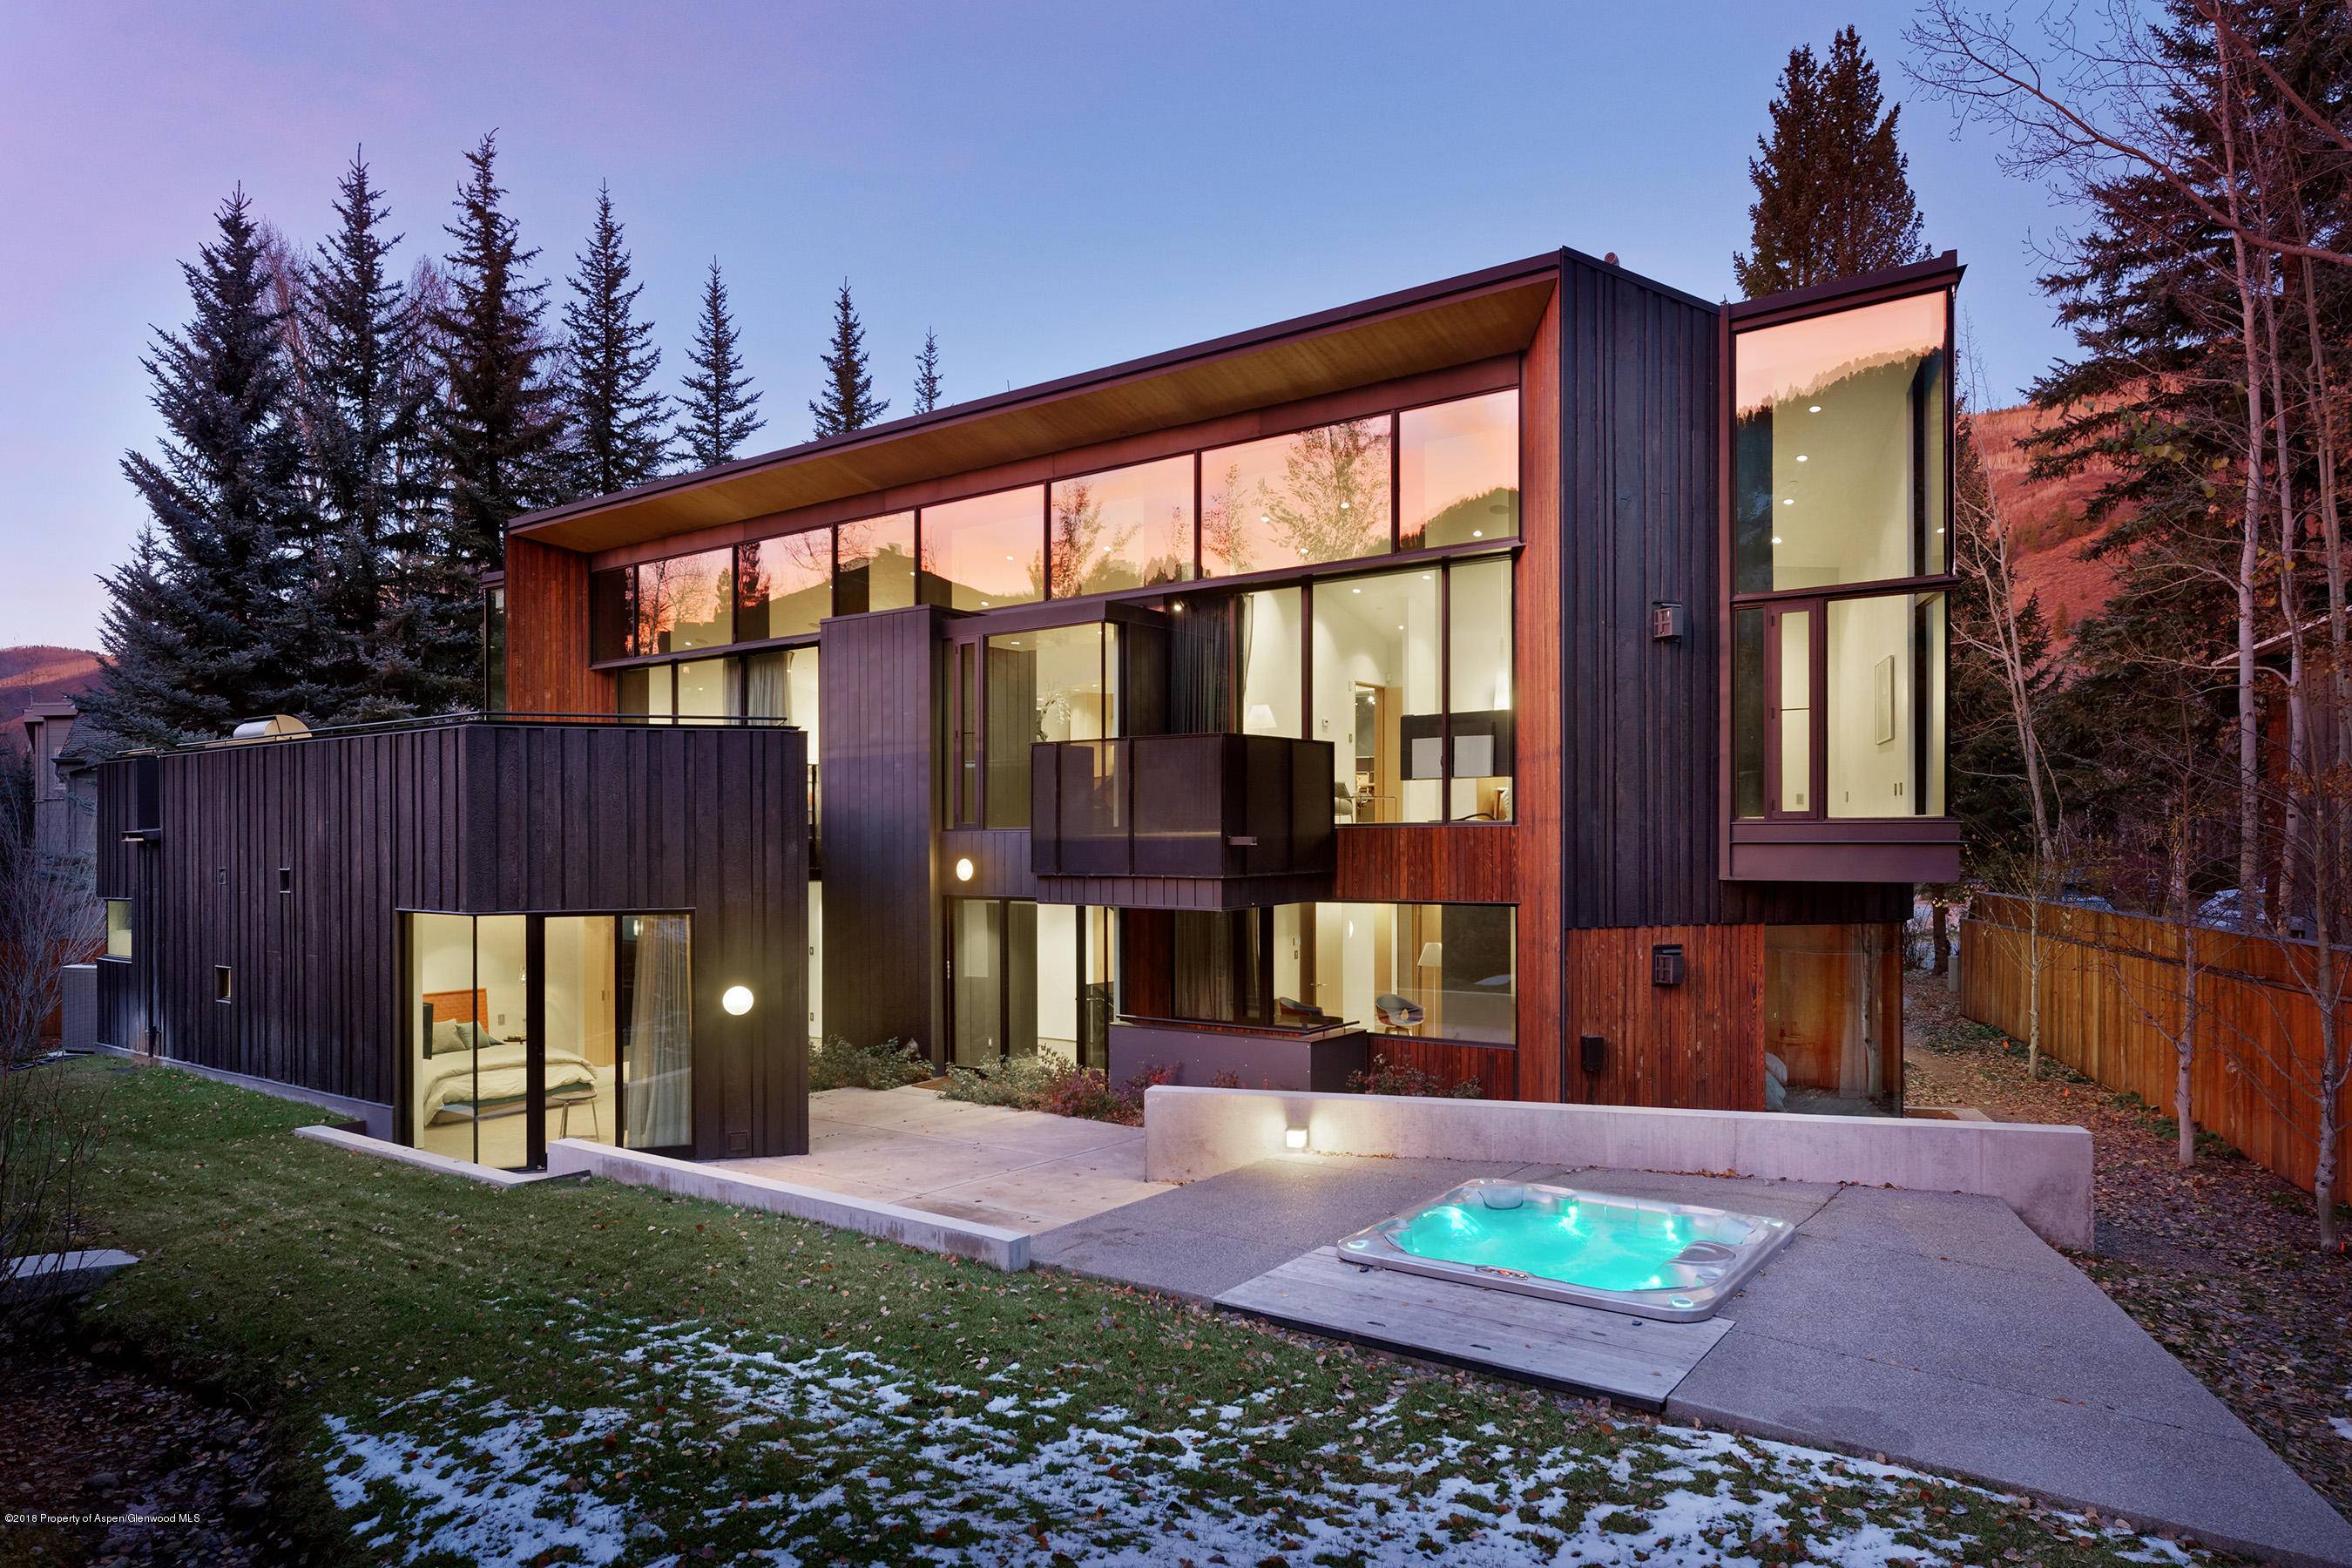 The Blackbird House, designed by internationally recognized architect Will Bruder.